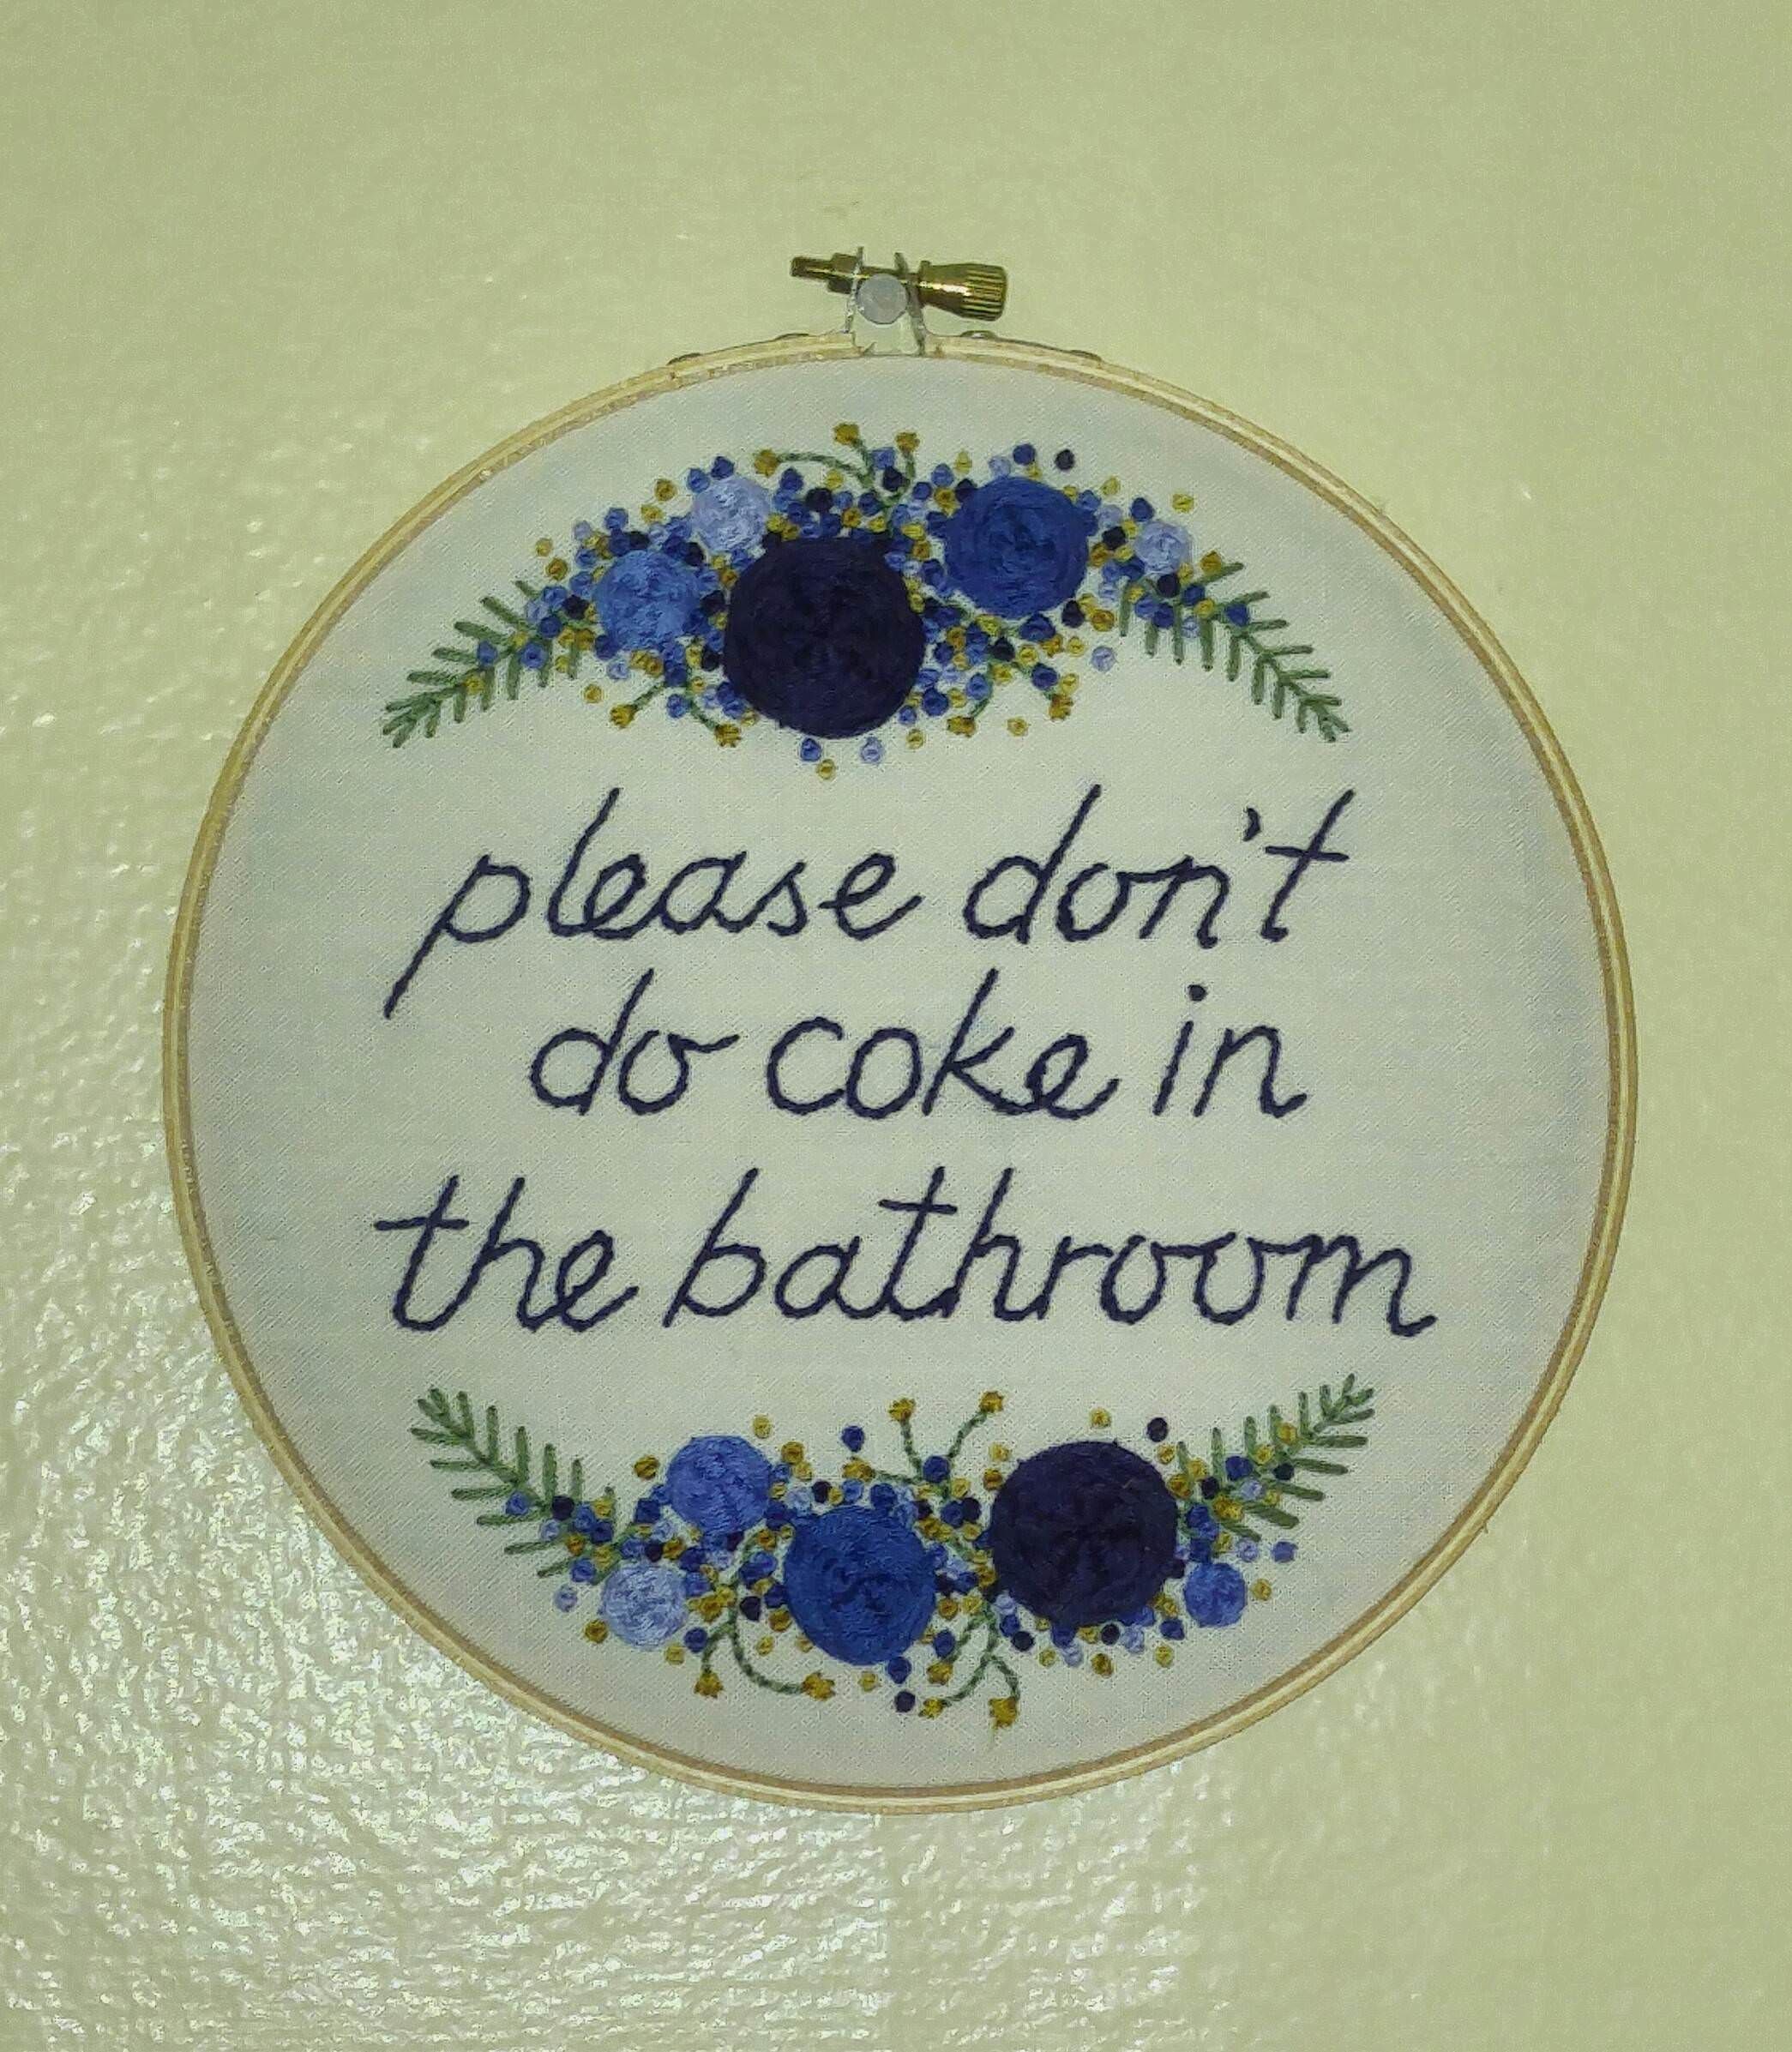 Visiting my brother in Louisiana for Mardi Gras. When nature called, I was greeted by this lovely needlepoint.